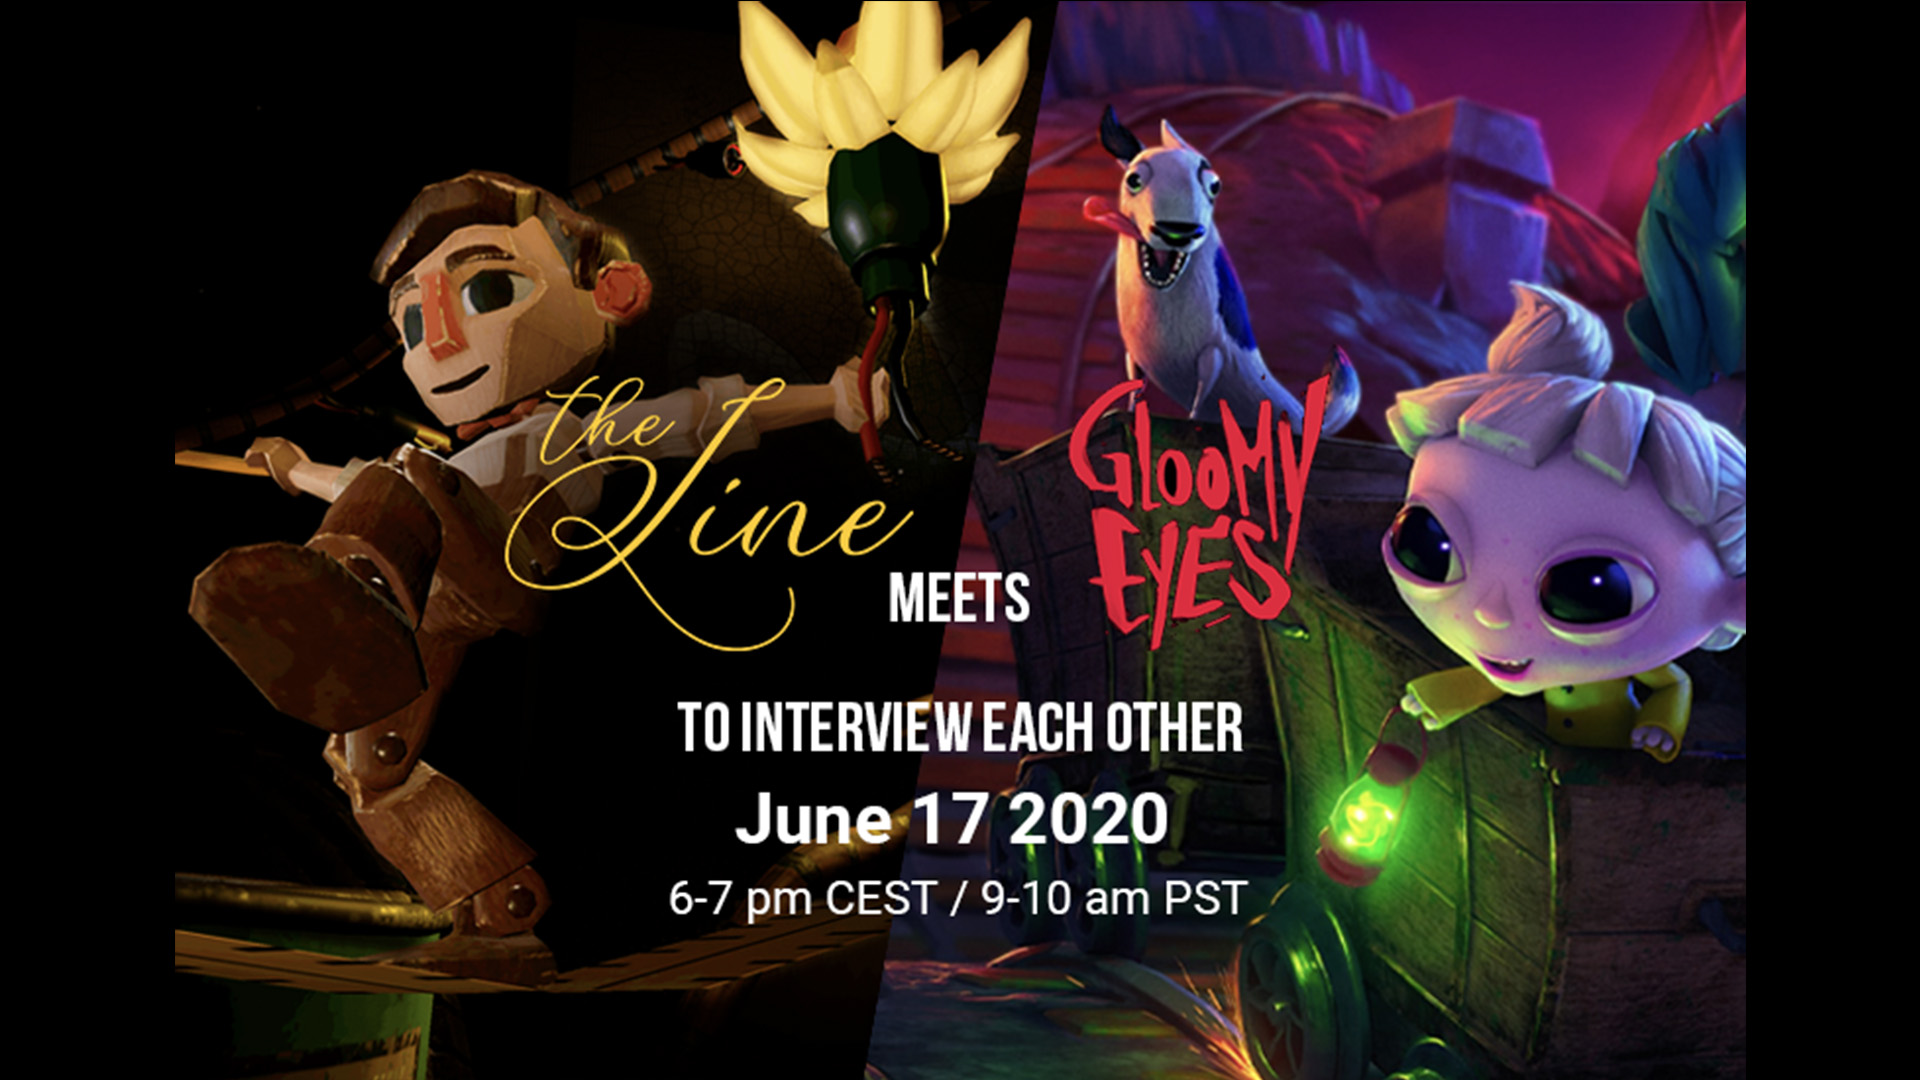 The Line meets Gloomy Eyes to interview each other